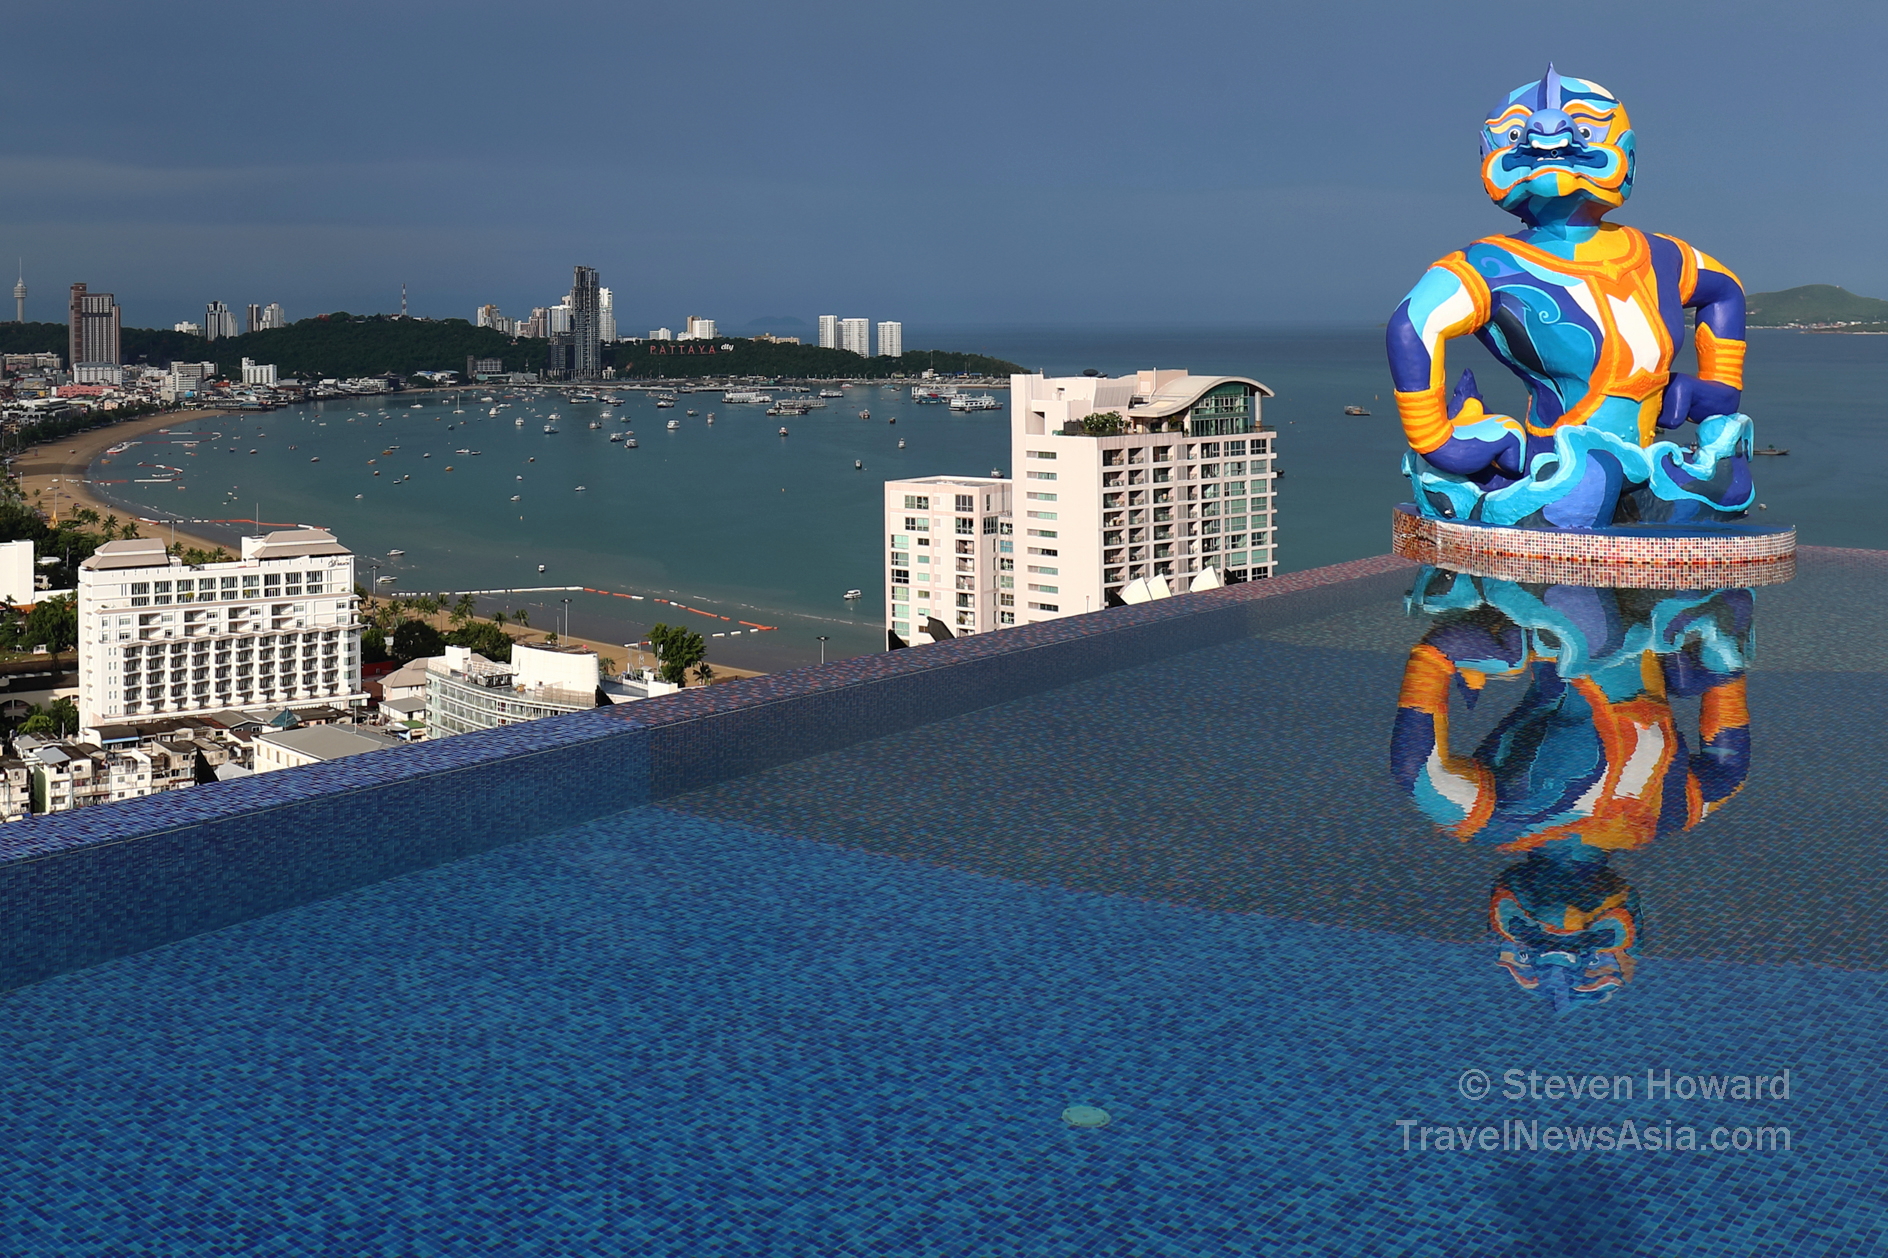 View from the Siam at Siam hotel in Pattaya, Thailand. Picture by Steven Howard of TravelNewsAsia.com Click to enlarge.